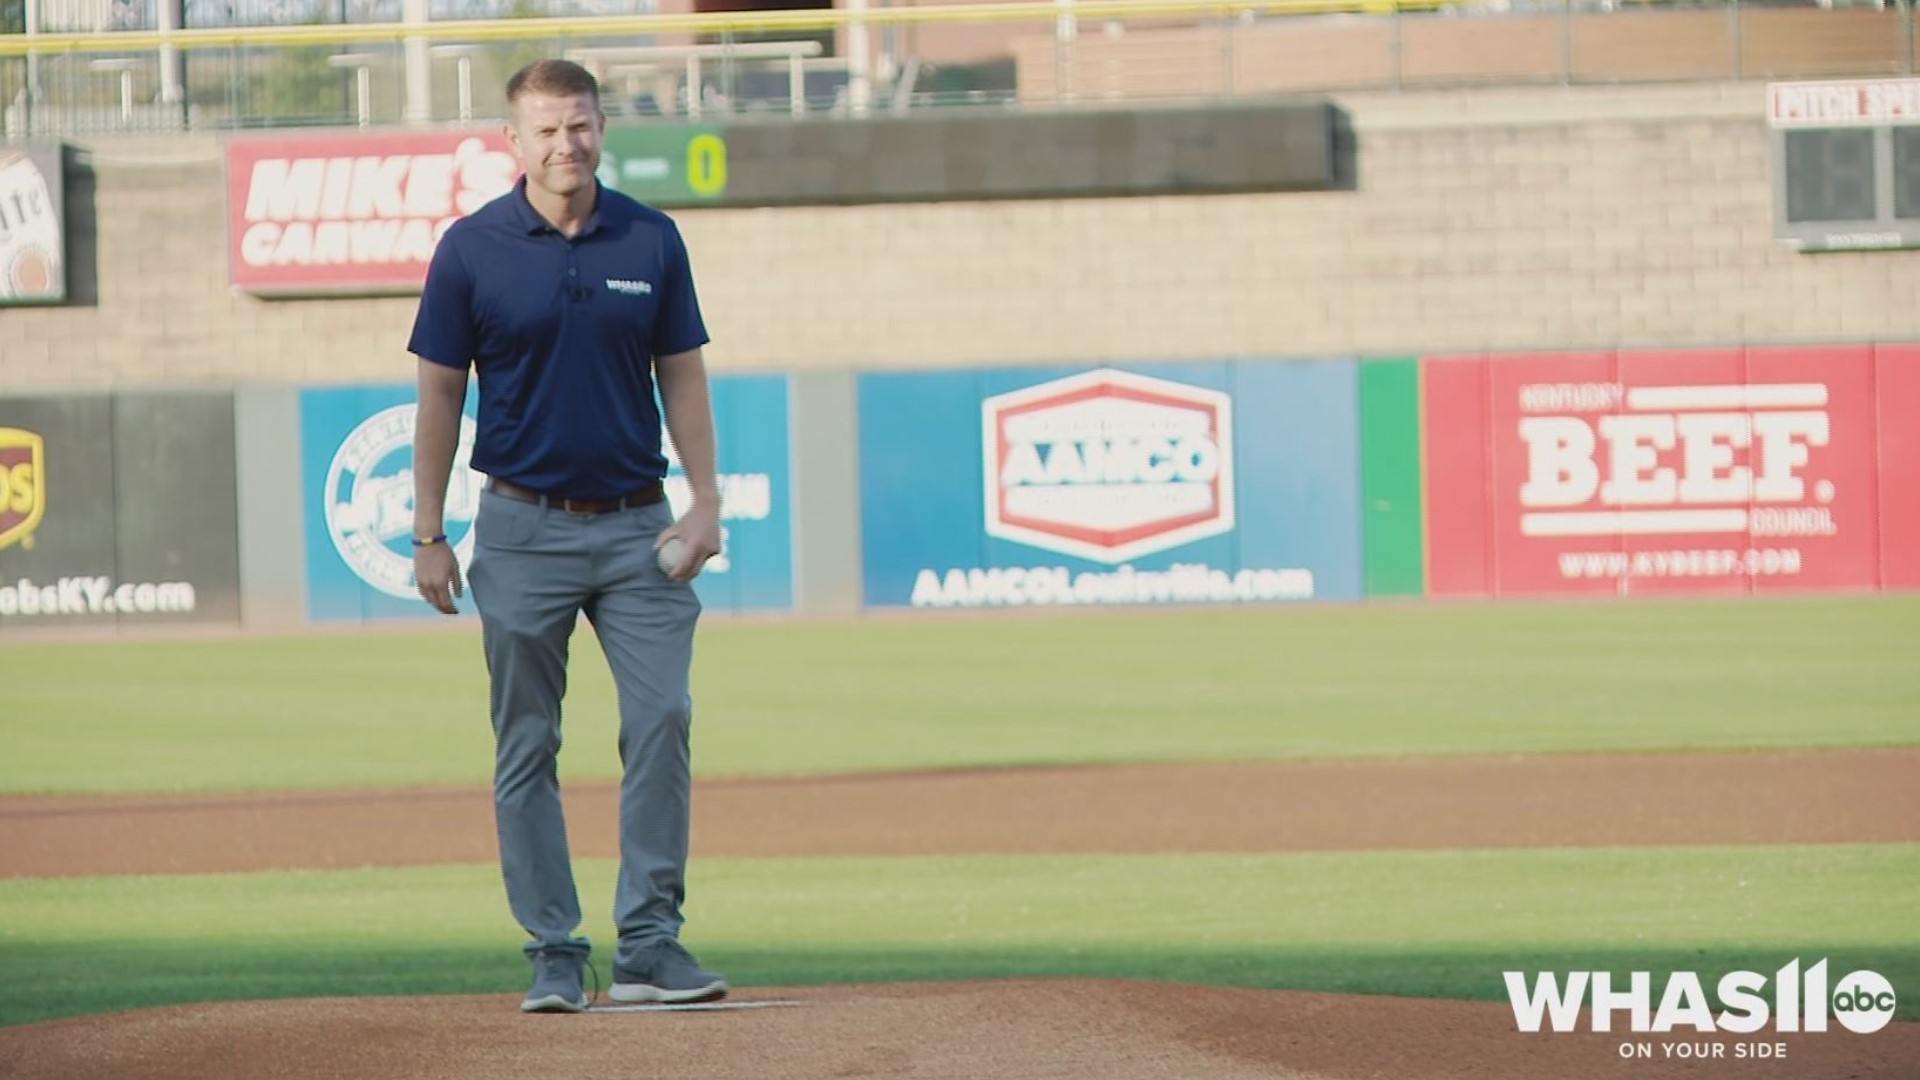 Our beloved sports director got his chance to throw out the first pitch during Tuesday's game. How did he do?